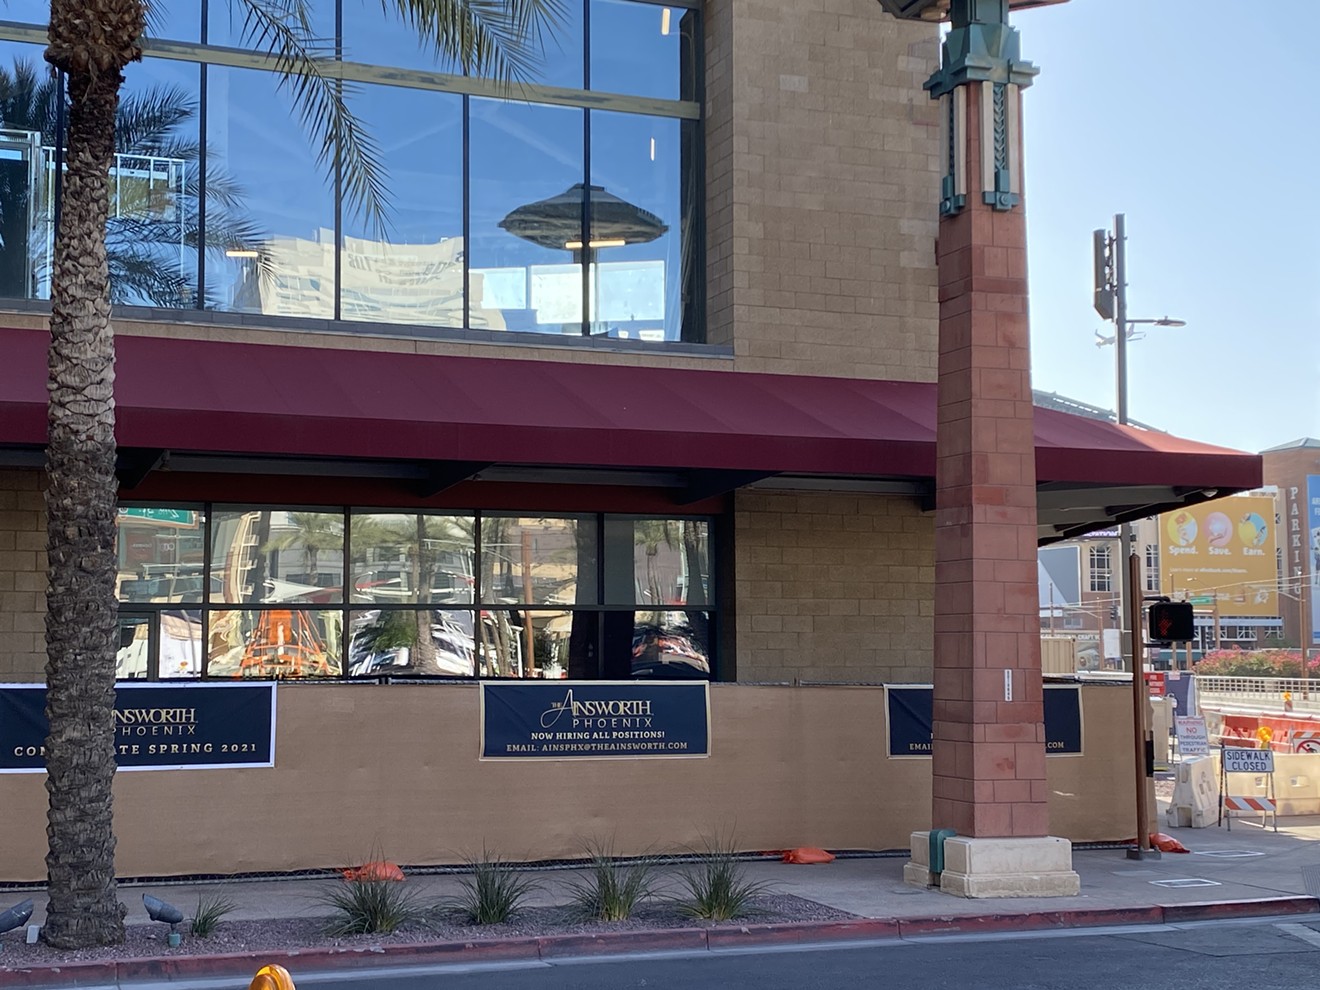 A new sports bar and restaurant is coming to downtown Phoenix.